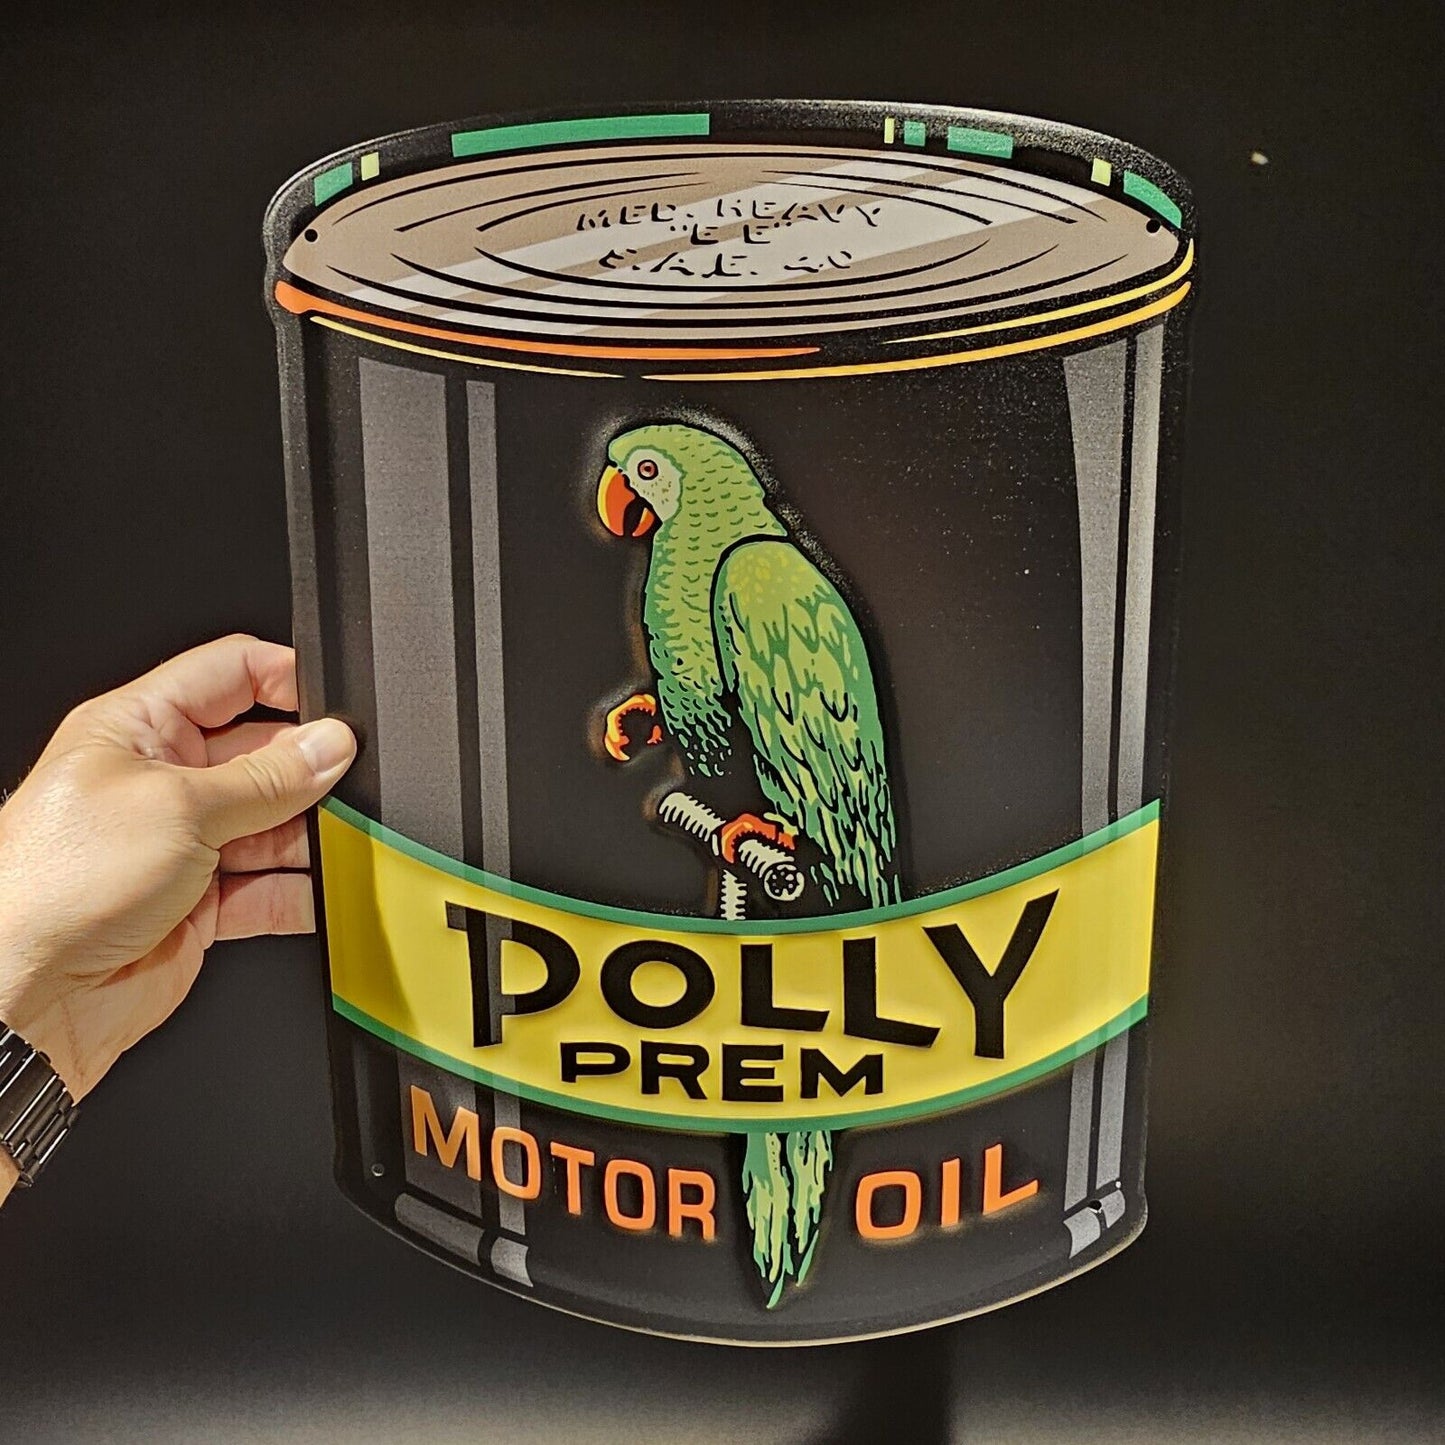 16"  Vintage Style Metal Polly Gas Car Sign